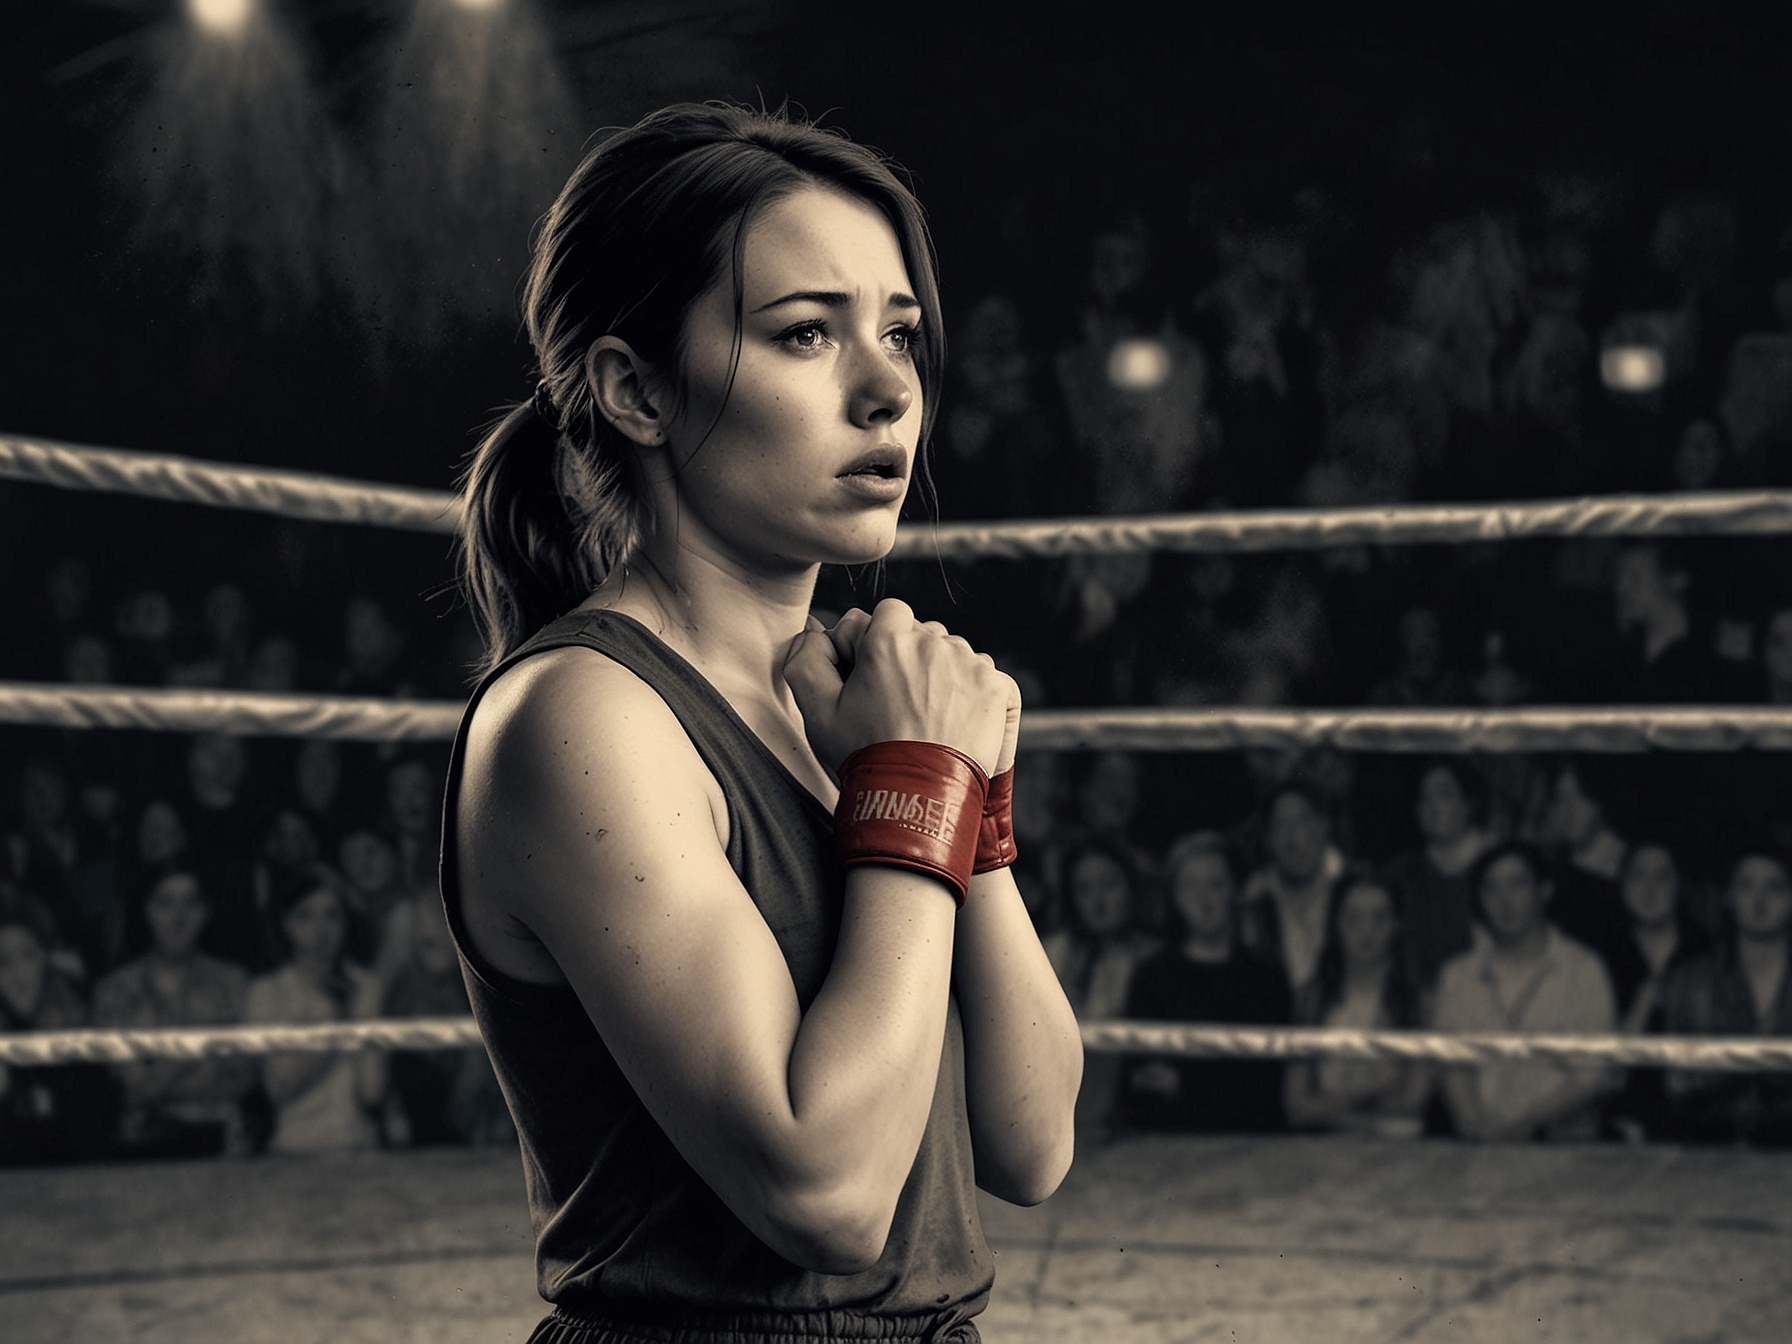 The fighter's girlfriend, looking distressed and overwhelmed, hesitates before walking away from the ring. The audience is captured in a mix of shock and curiosity as they witness the heartbreaking rejection.